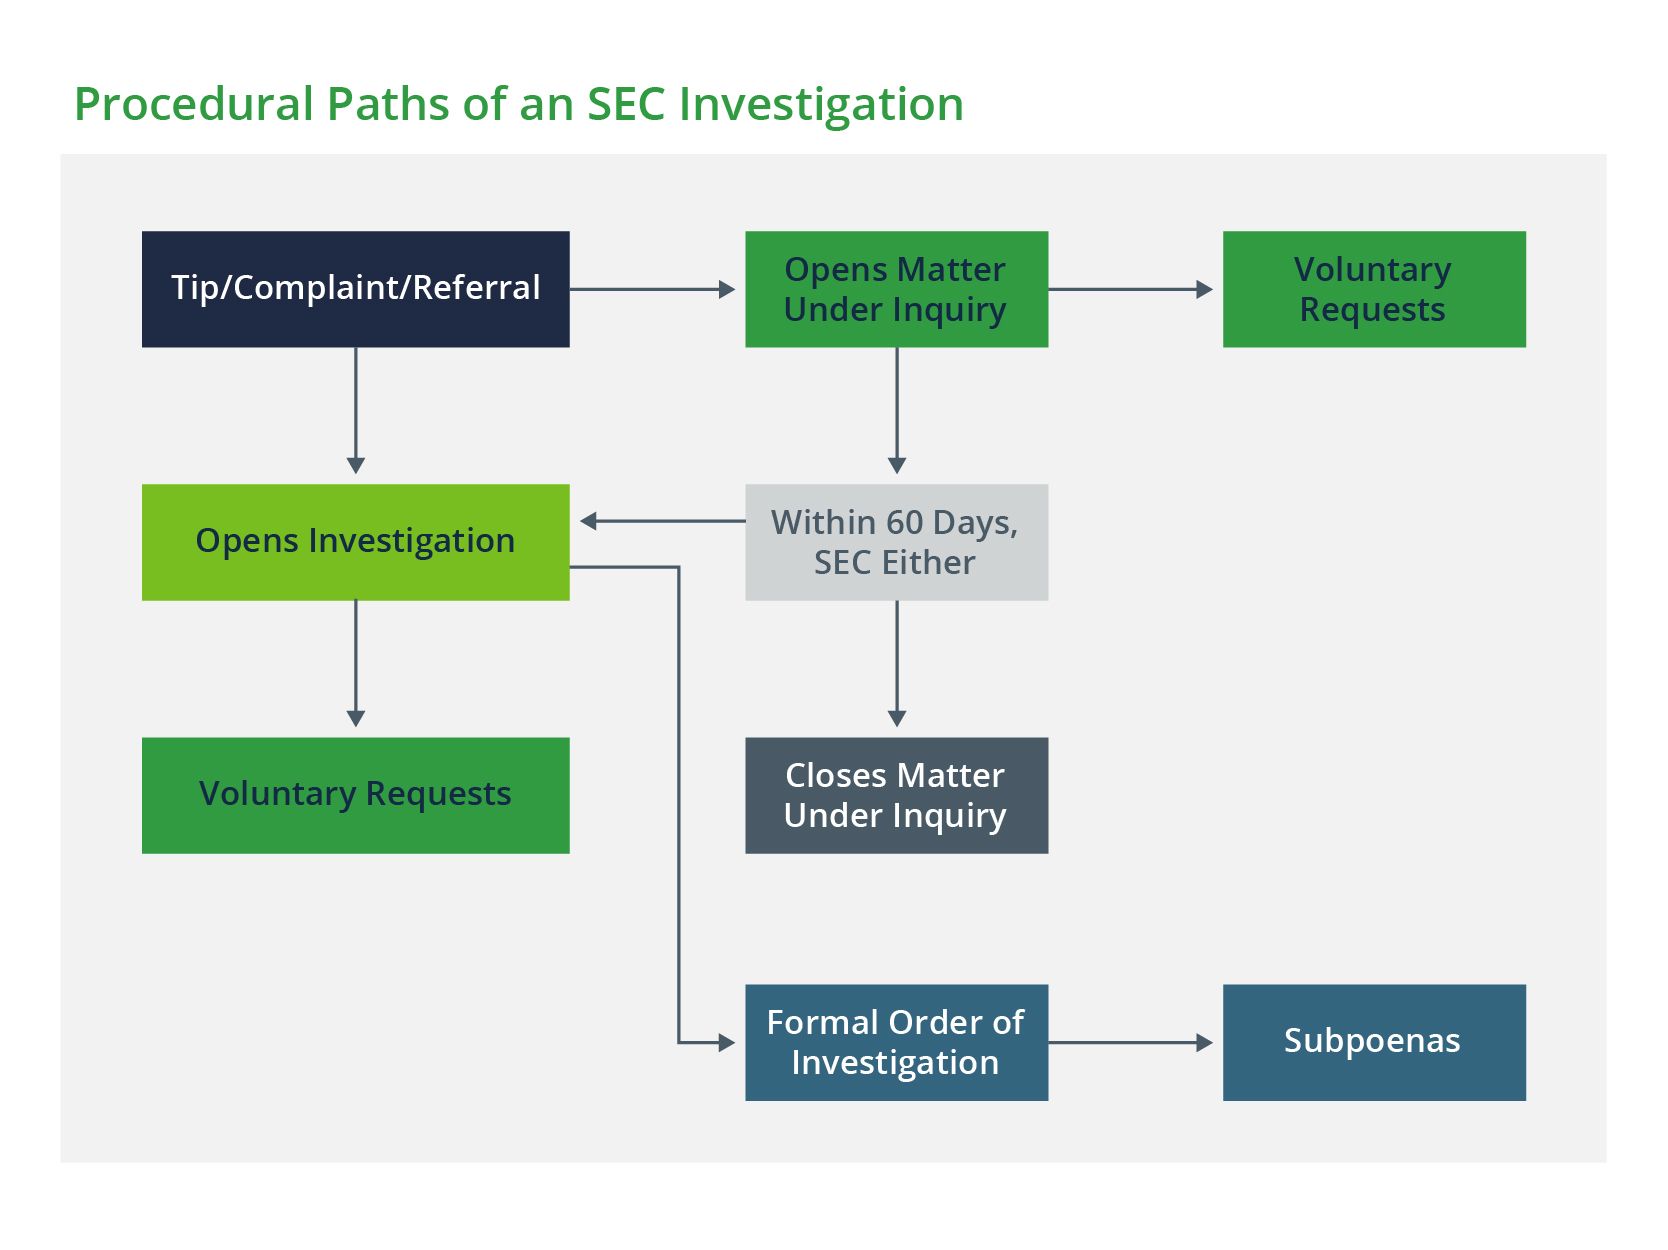 Flow chart showing the Procedural Paths of an SEC Investigation